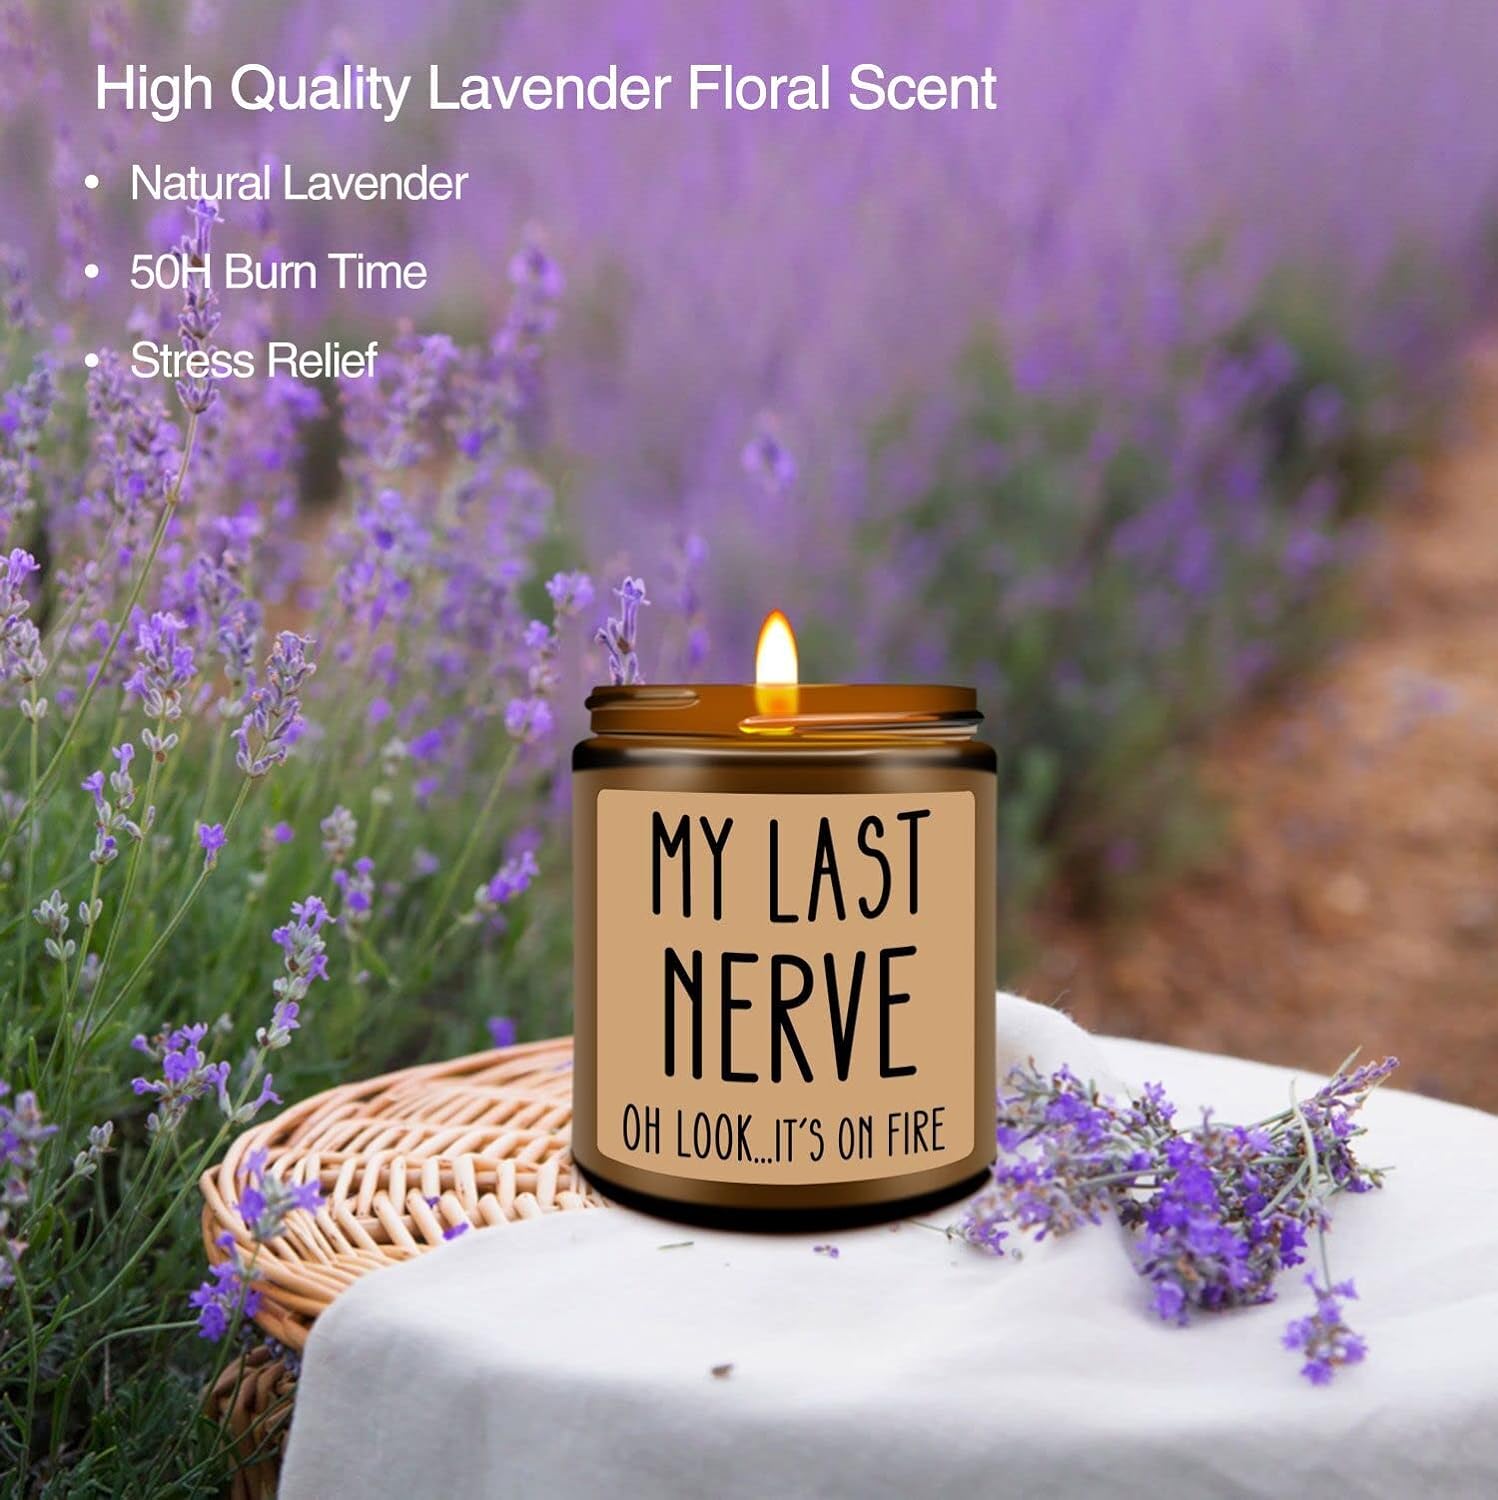 Homsolver Birthday Gifts for Women, Funny Gifts for Best Friend Women - My Last Nerve Candle - Unique Birthday Gifts for Women, Her, Mom, BFF, Best Friends, Girlfriend, Sister